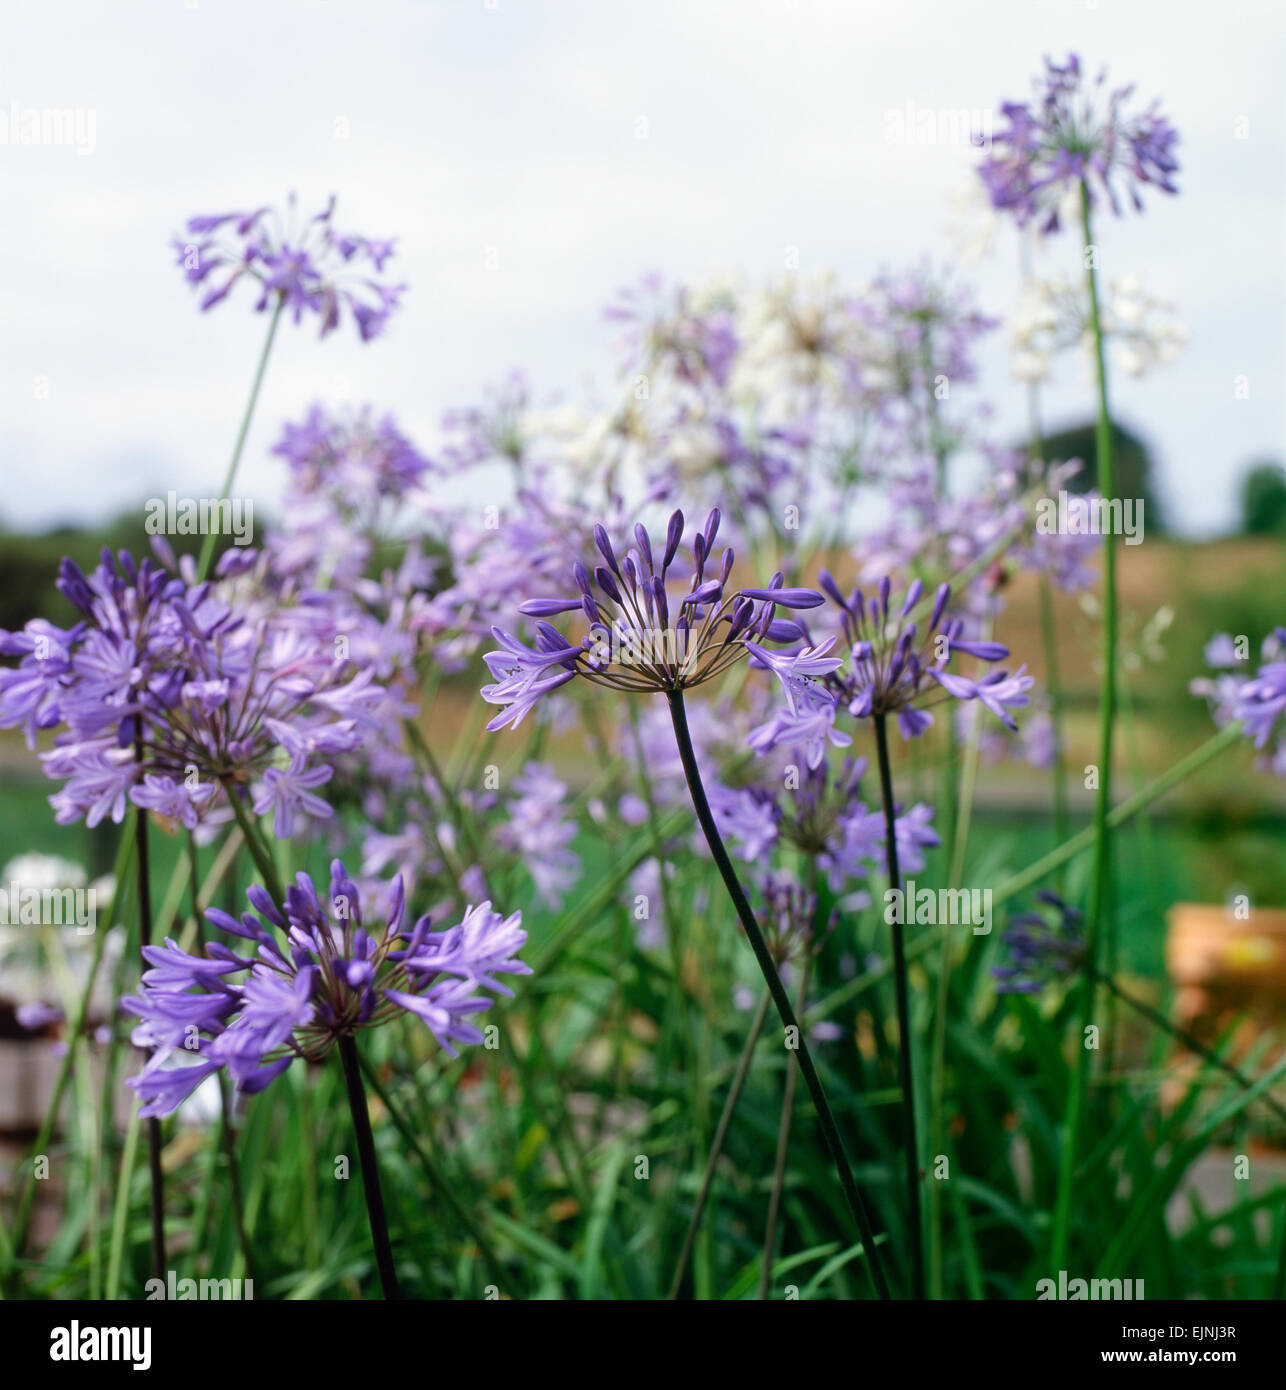 Agapanthus or African Lily in bloom at the National Botanic Garden of Wales UK  KATHY DEWITT Stock Photo